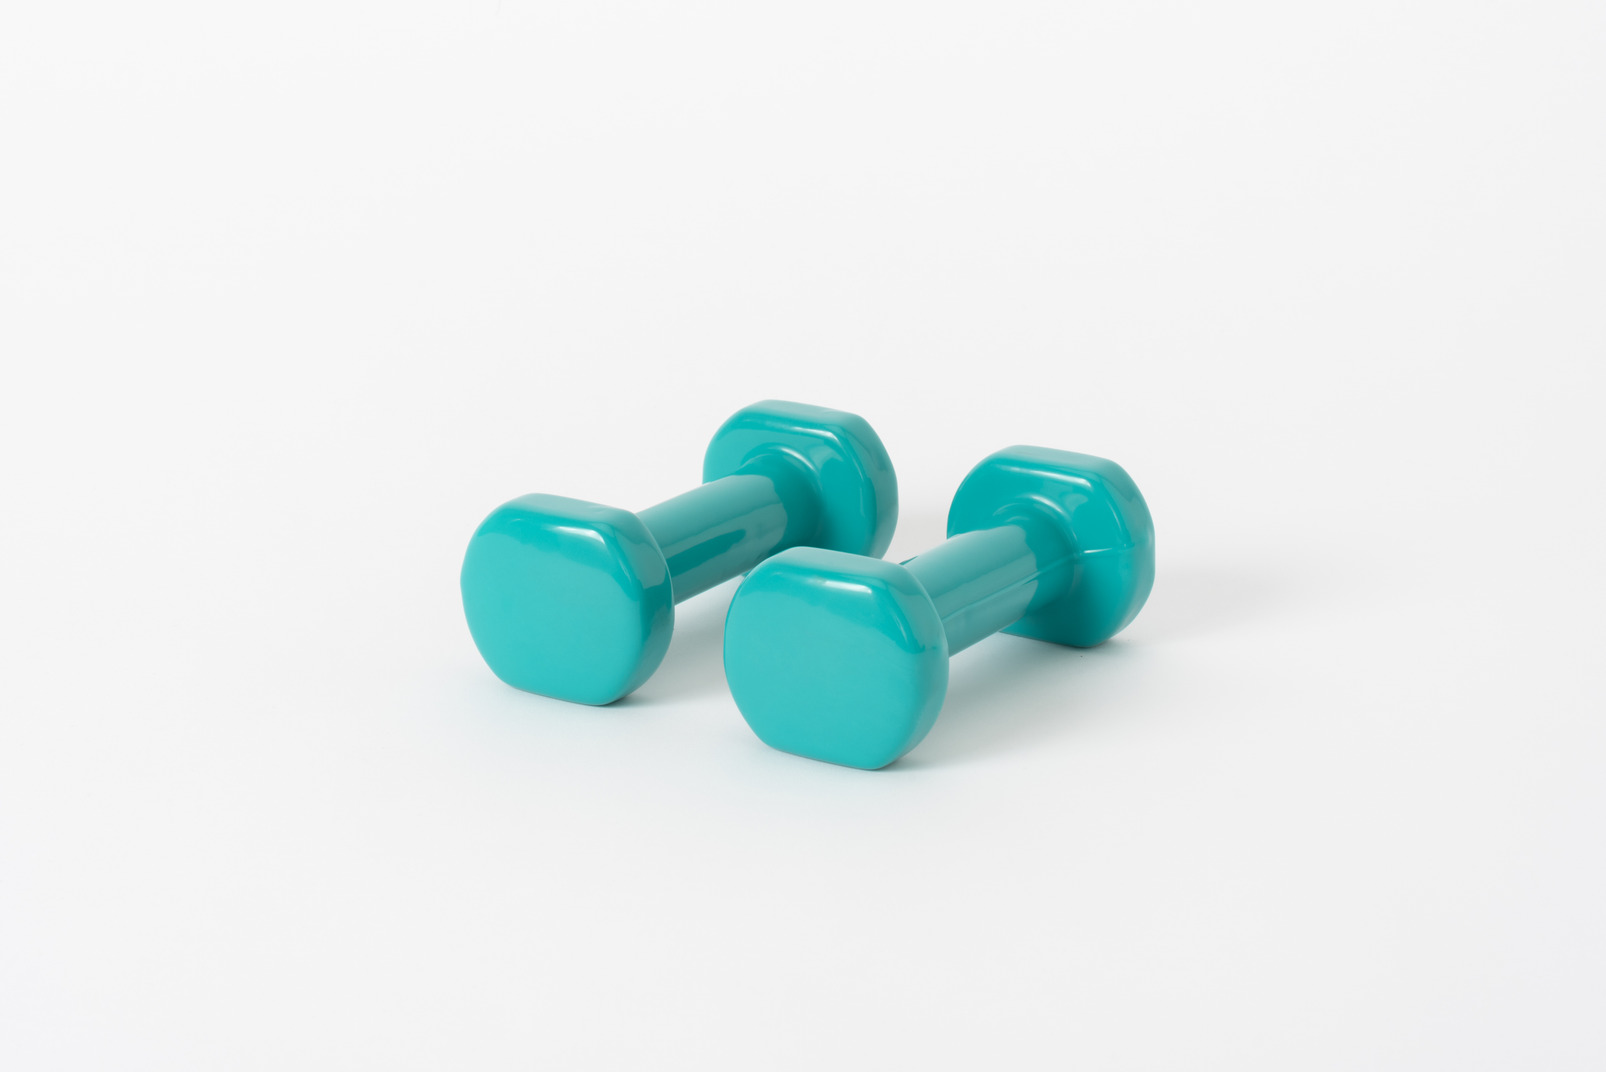 Two plastic toy dumbbells